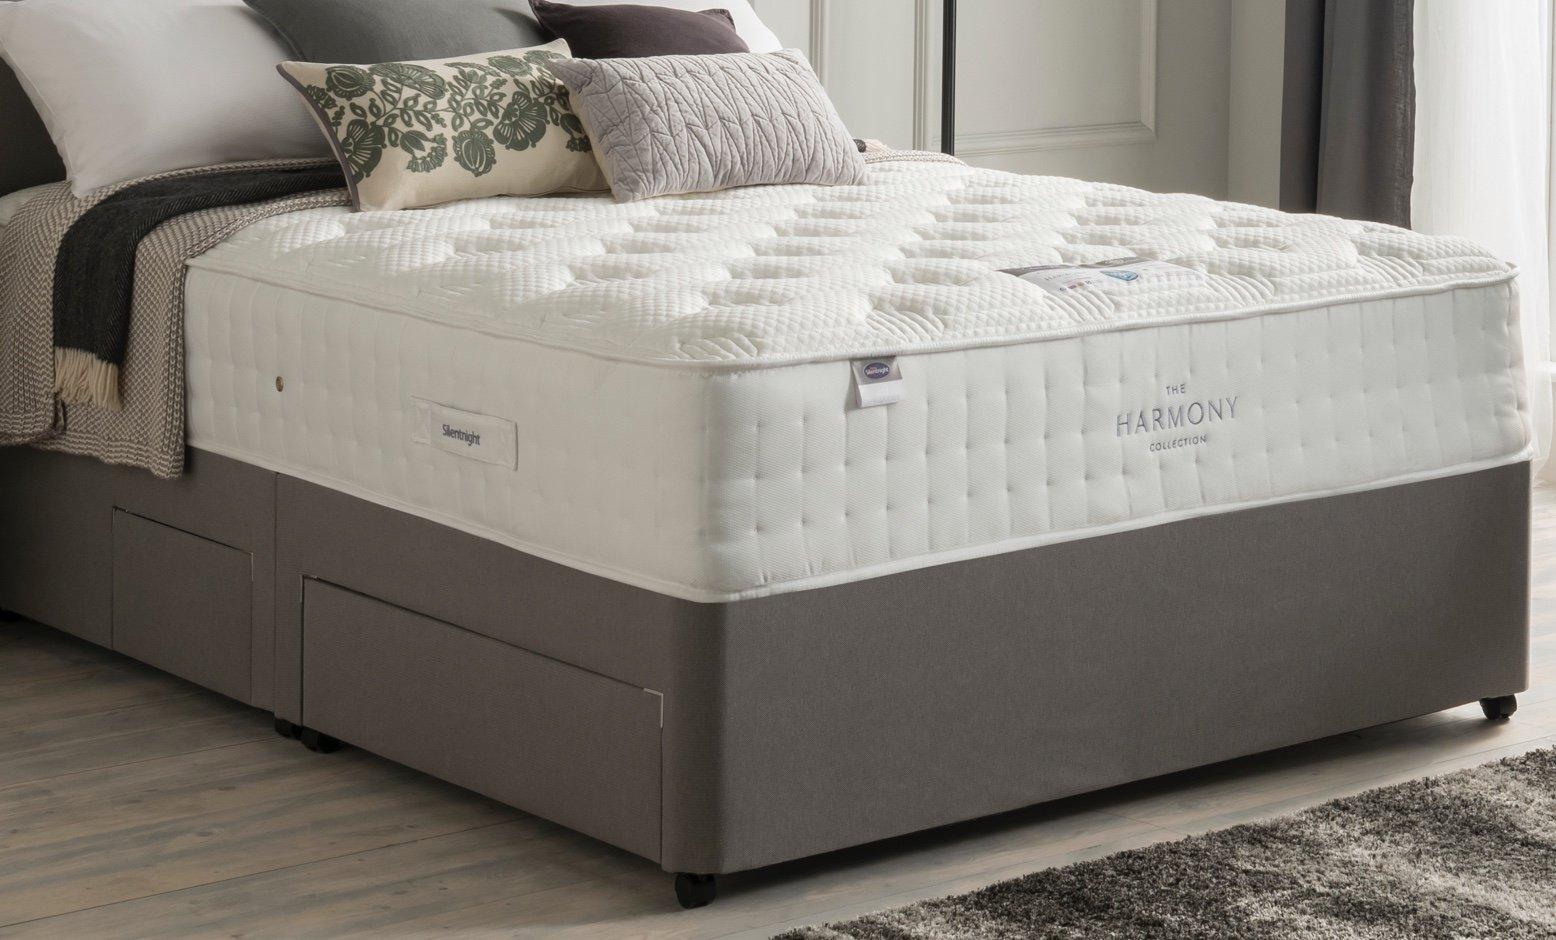 Your Simple Guide to Space Saving Beds - The Sleep Matters Club